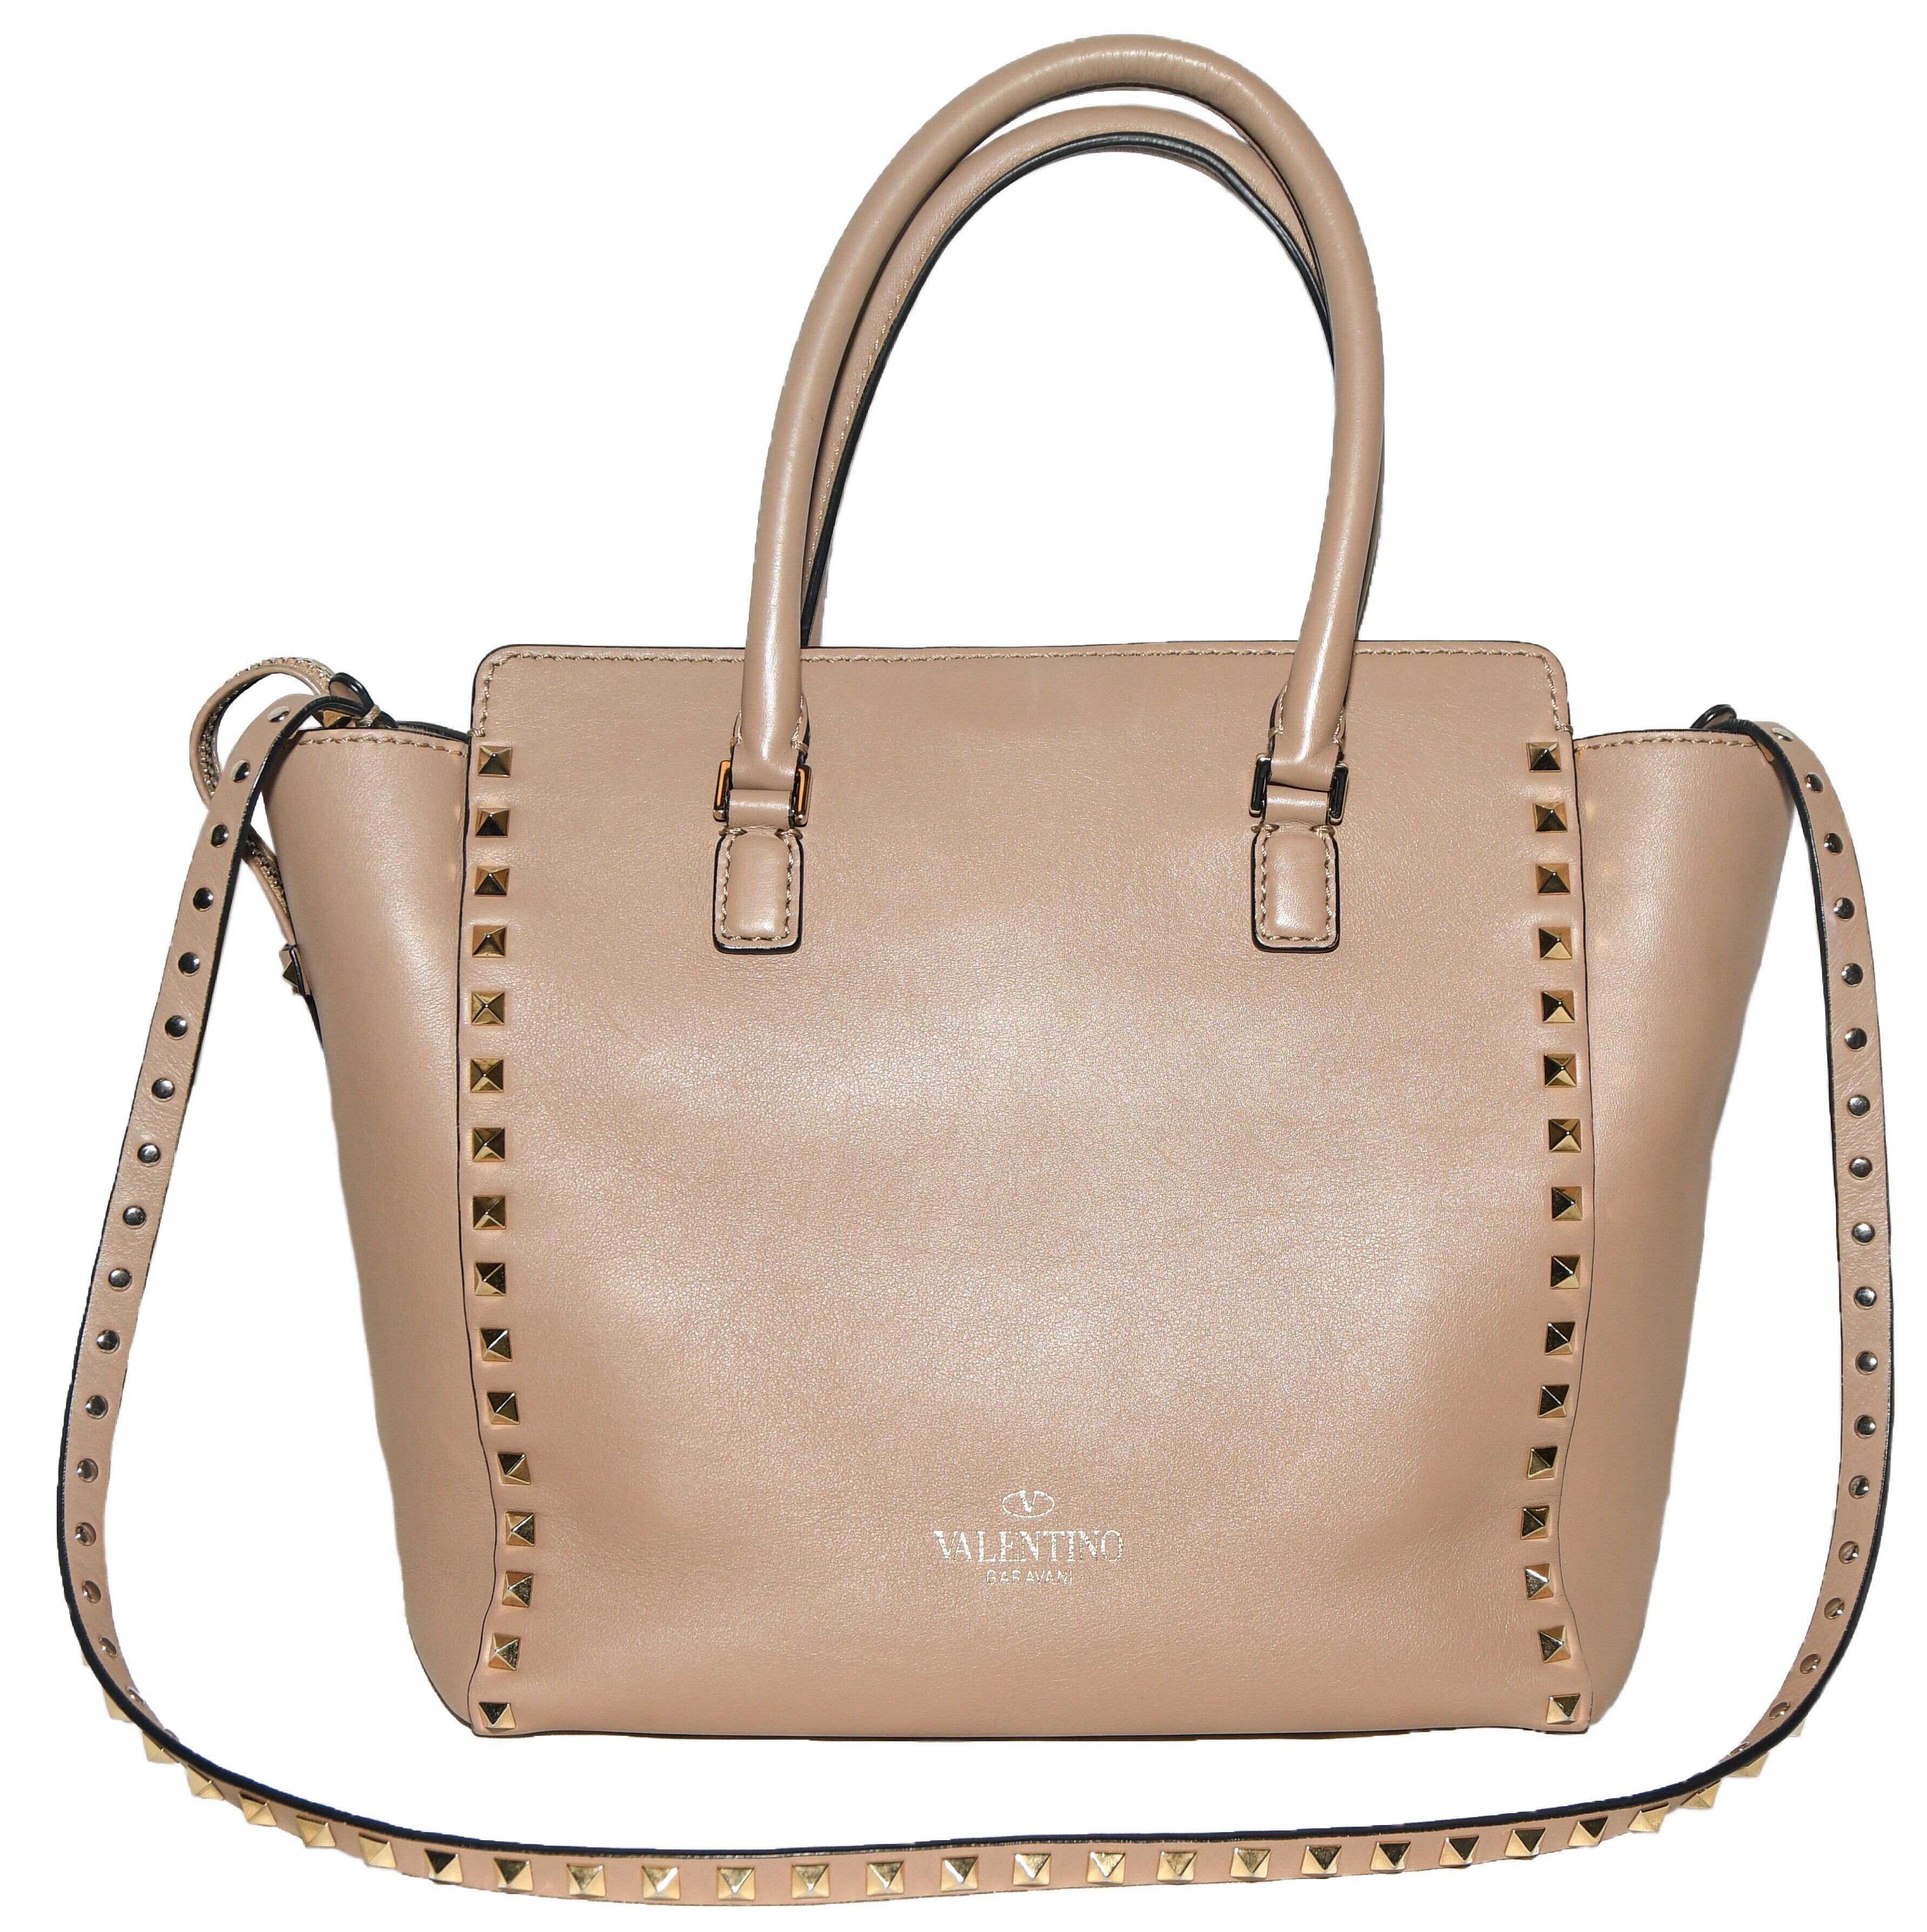 Valentino Rockstud  top handle taupe tote bag is a luxurious rich grained leather crafted by the famous Italian house of Valentino.  This bag is accentuated with the rose color pyramid shape Rockstuds.  For closure, at front,  a push lock fastener. 